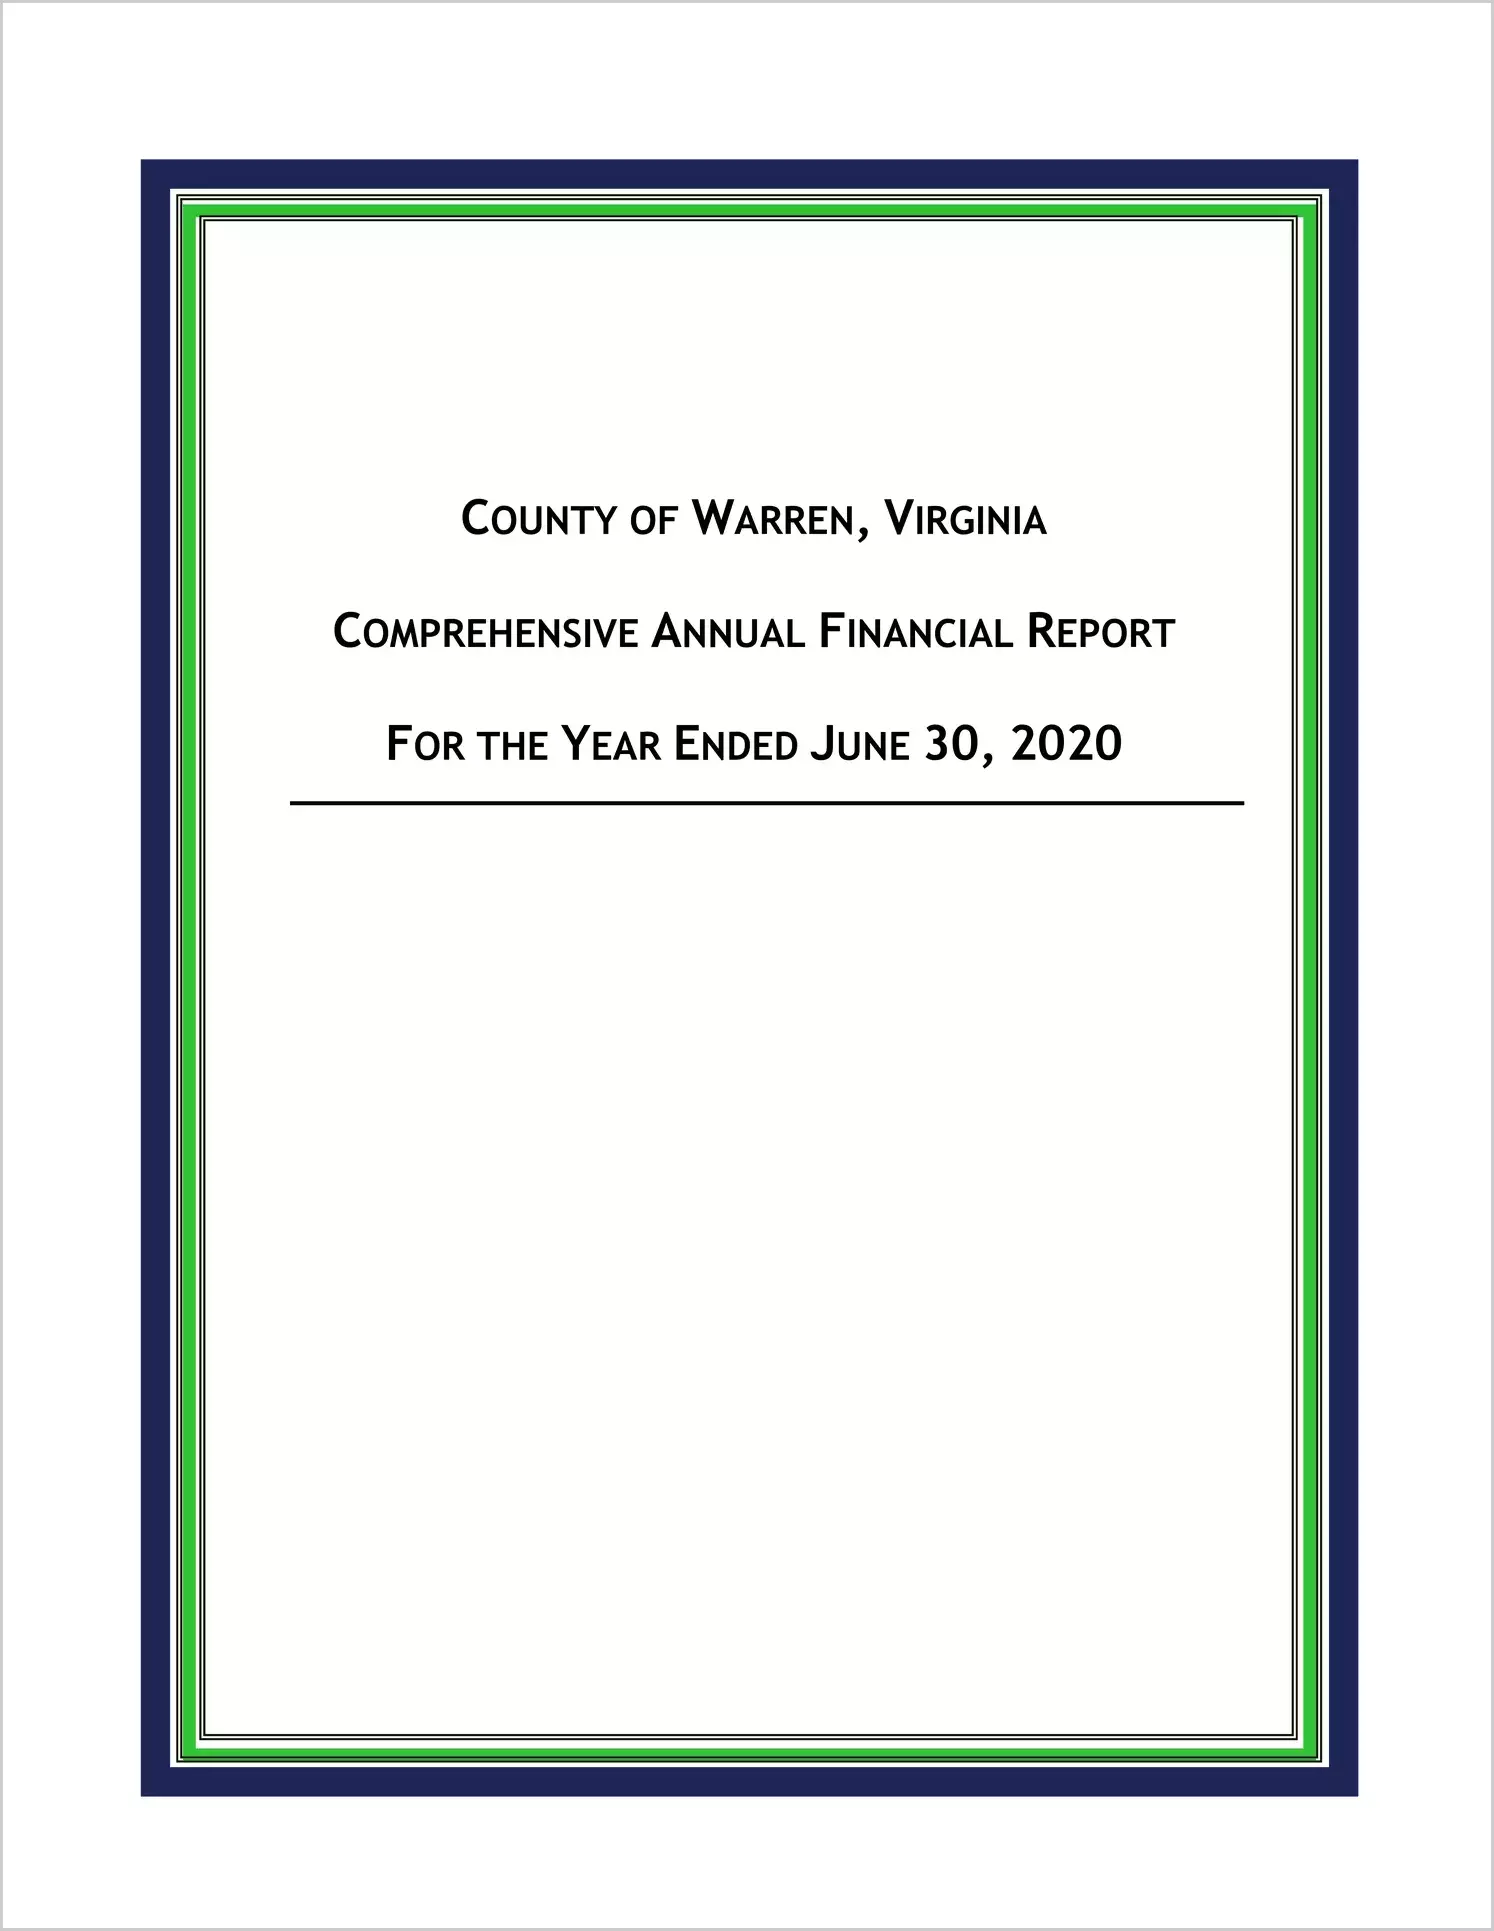 2020 Annual Financial Report for County of Warren